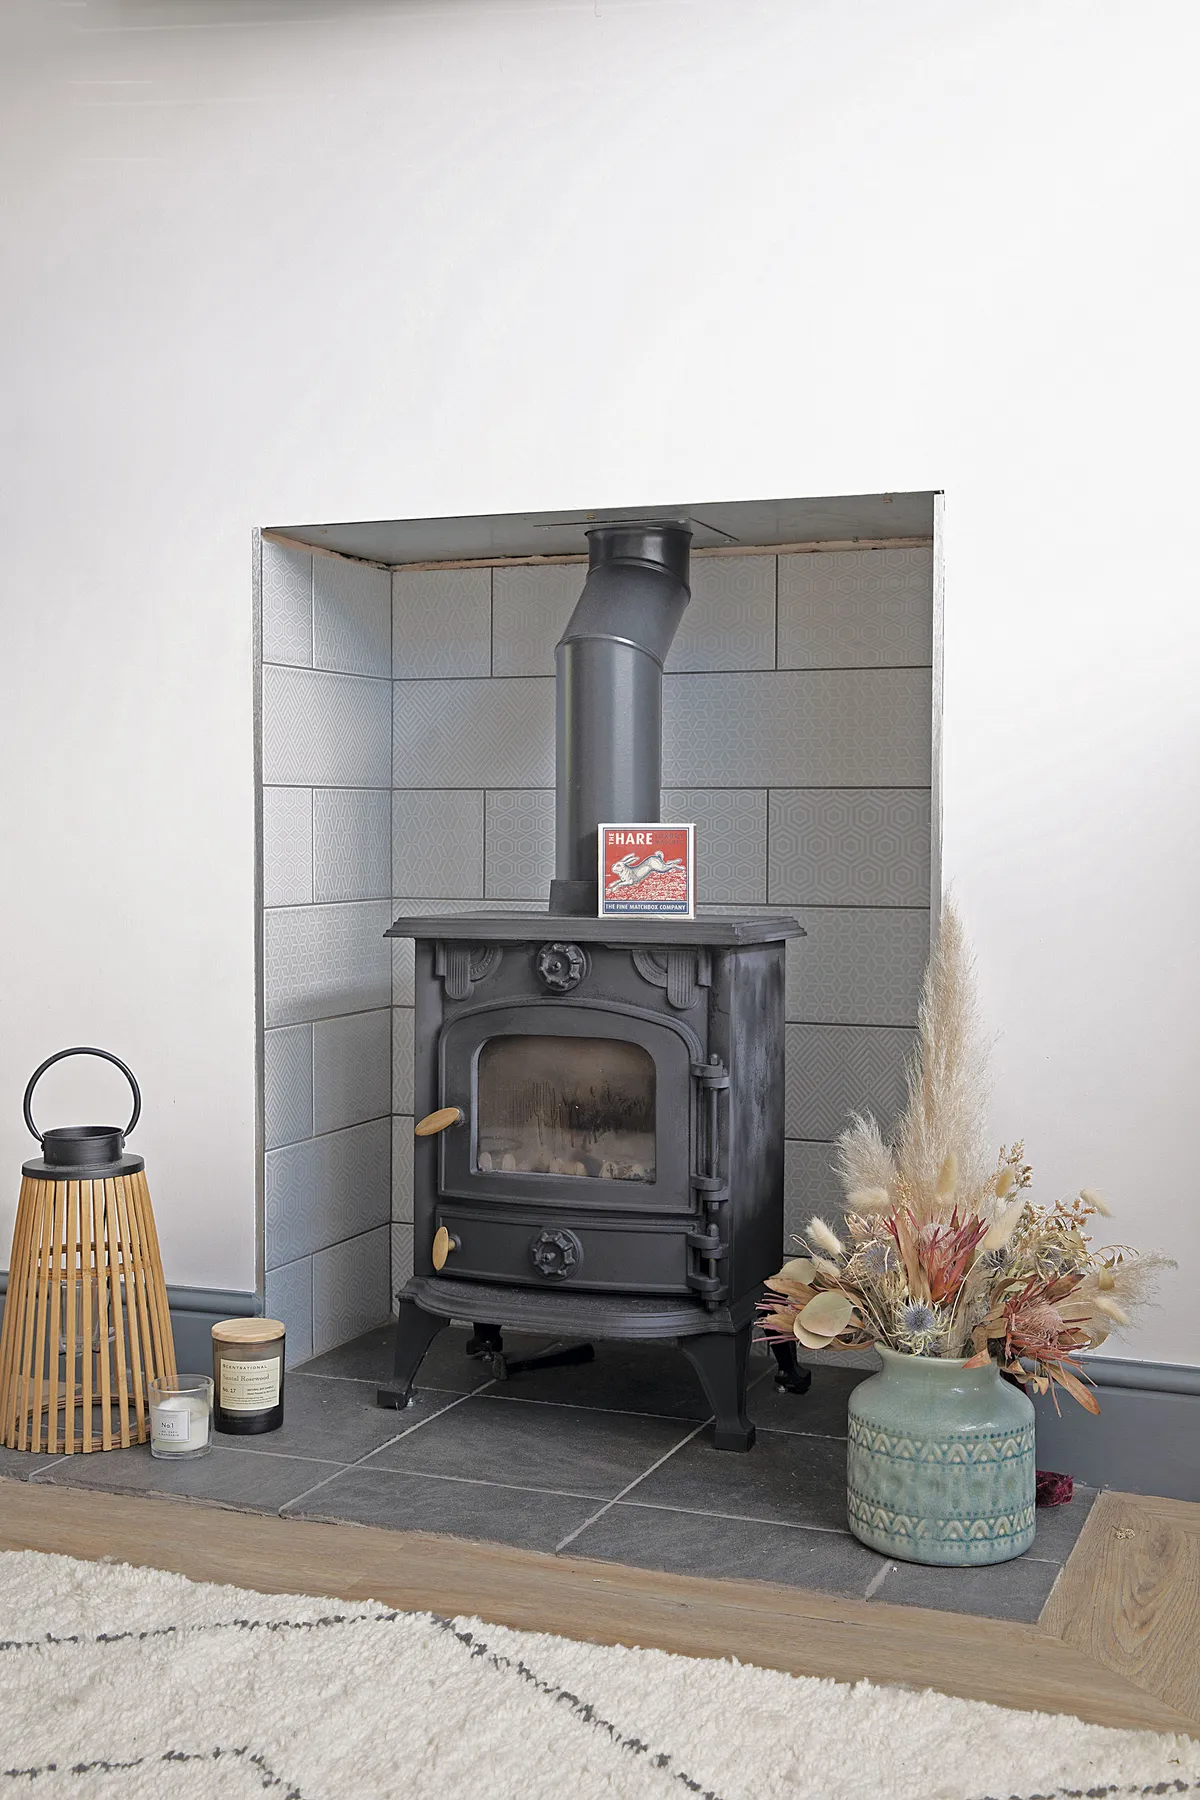 Buying a second-hand wood-burner from eBay has helped keep costs down, while simple flat matt white tiles behind make it stand out more